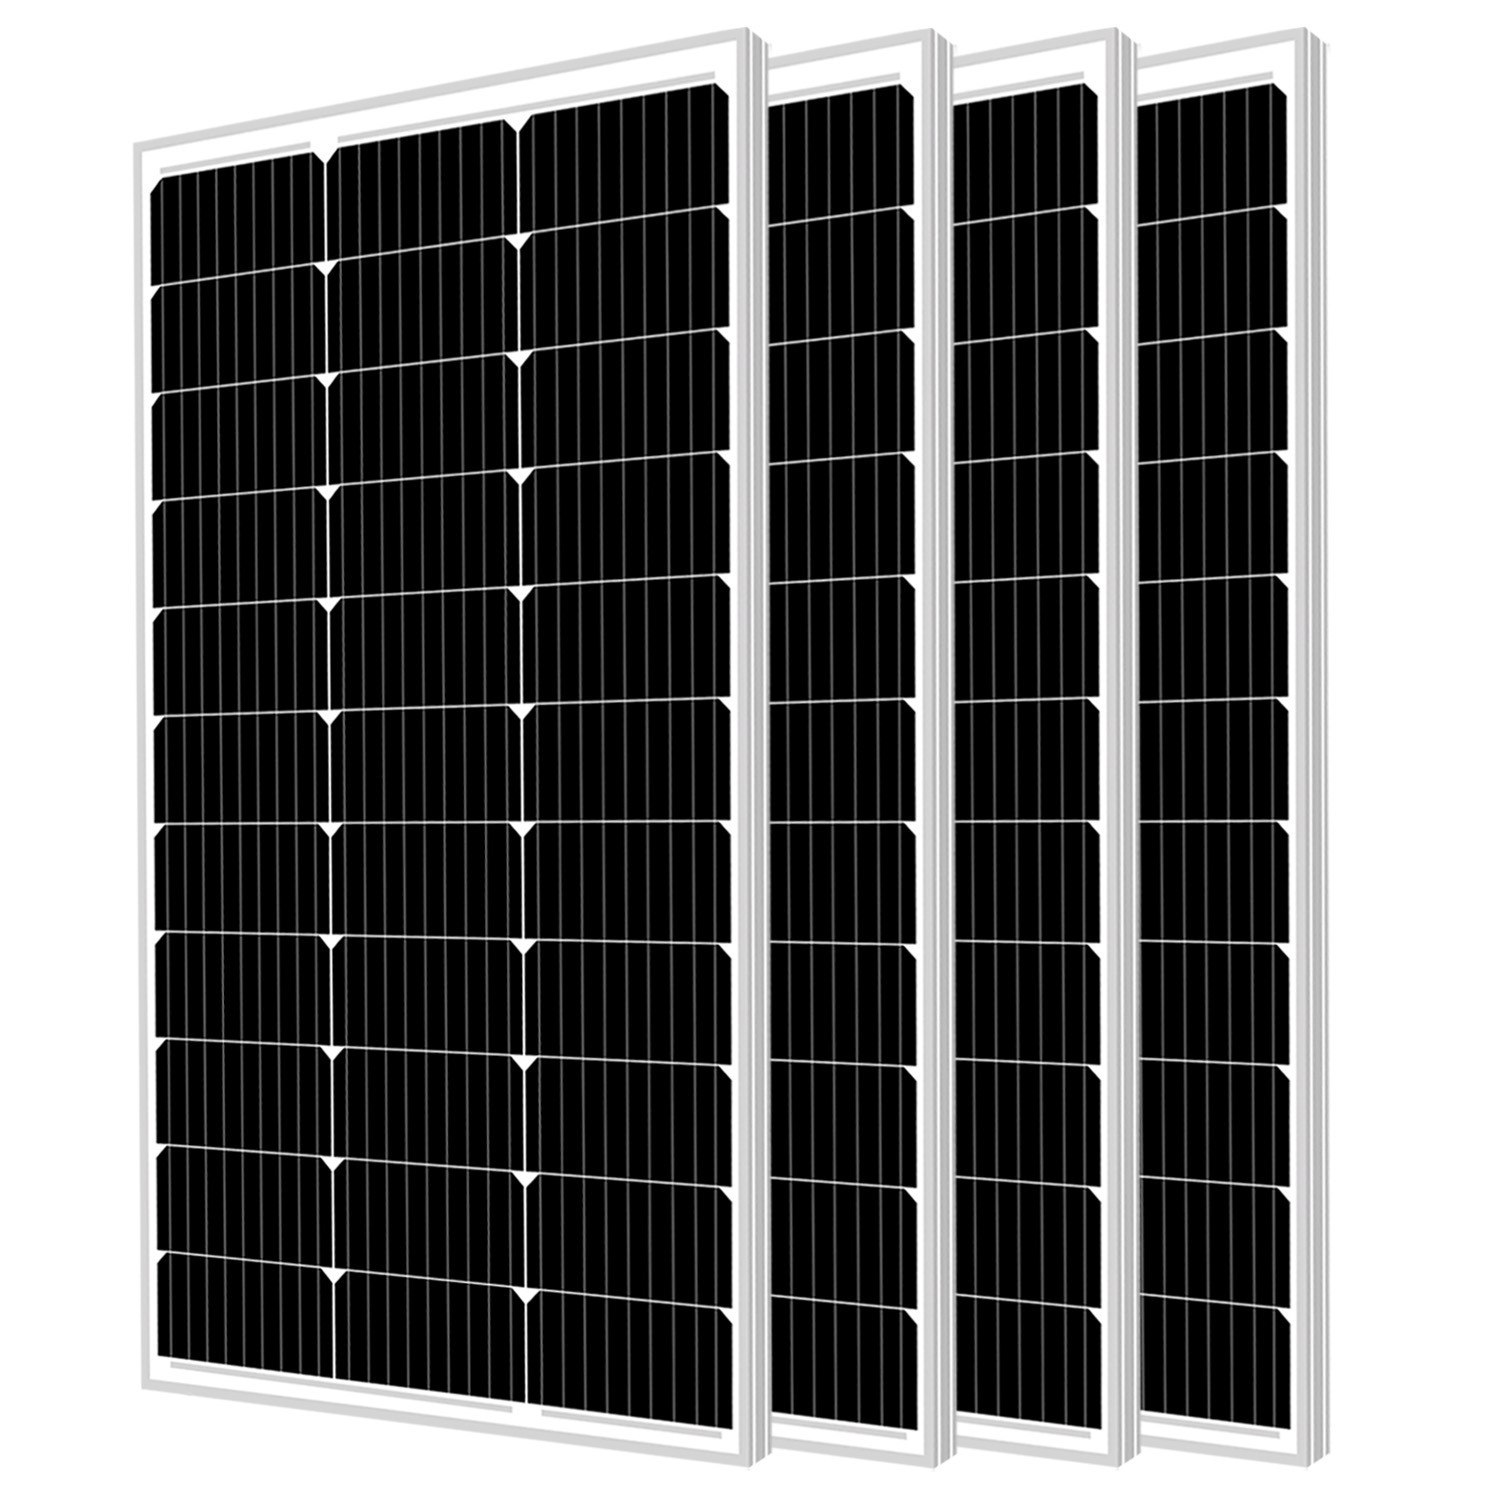 100W Solar Panel 12V Mono Off Grid Battery Charger for Camping Outdoor Sports - 4 Pack